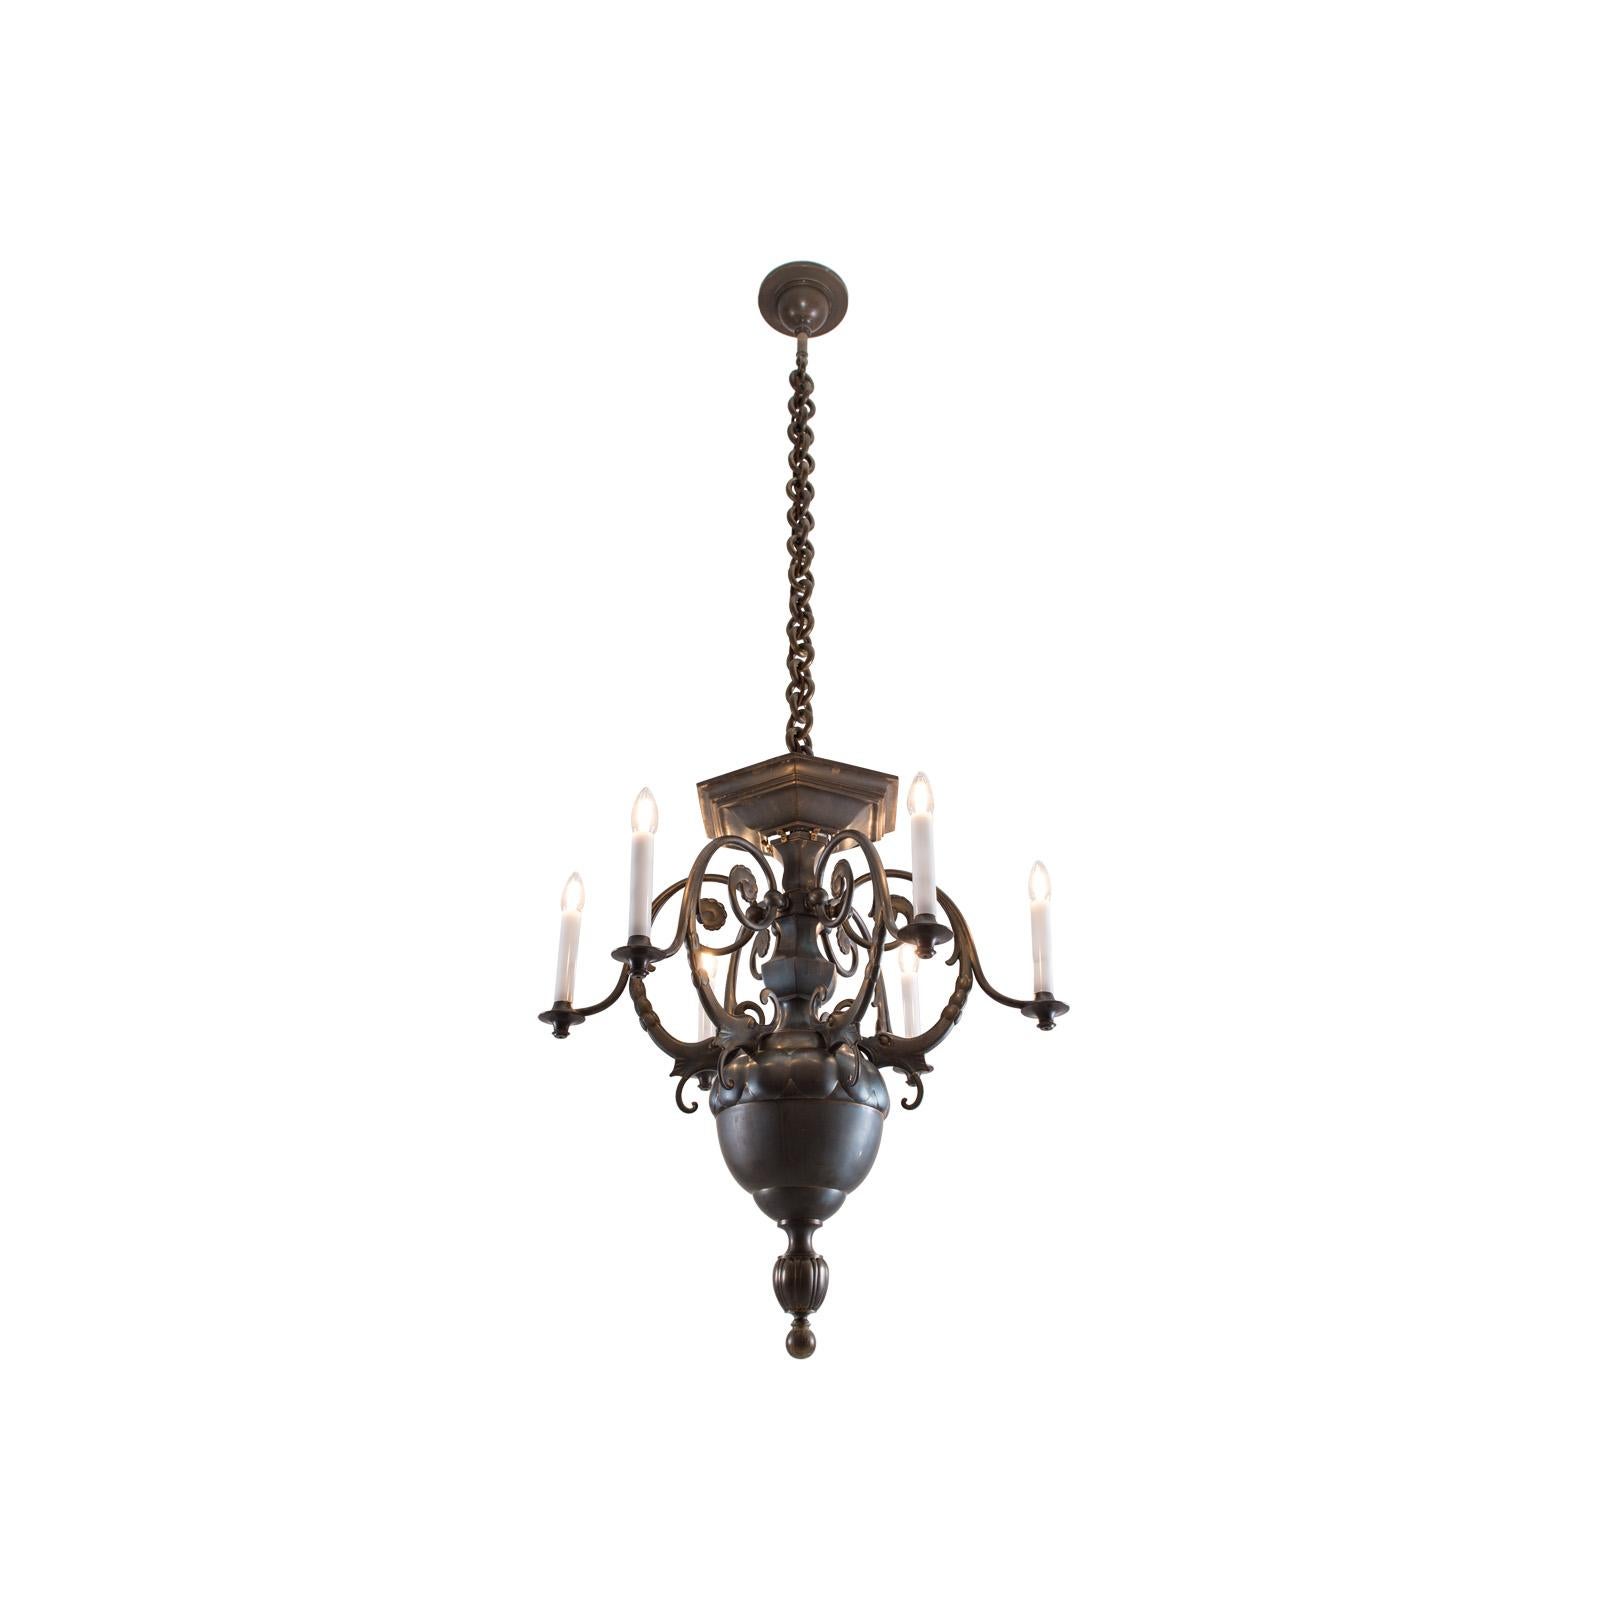 Original Early Art Deco Bronze Chandelier, 1914 20th Century In Excellent Condition For Sale In Vienna, AT